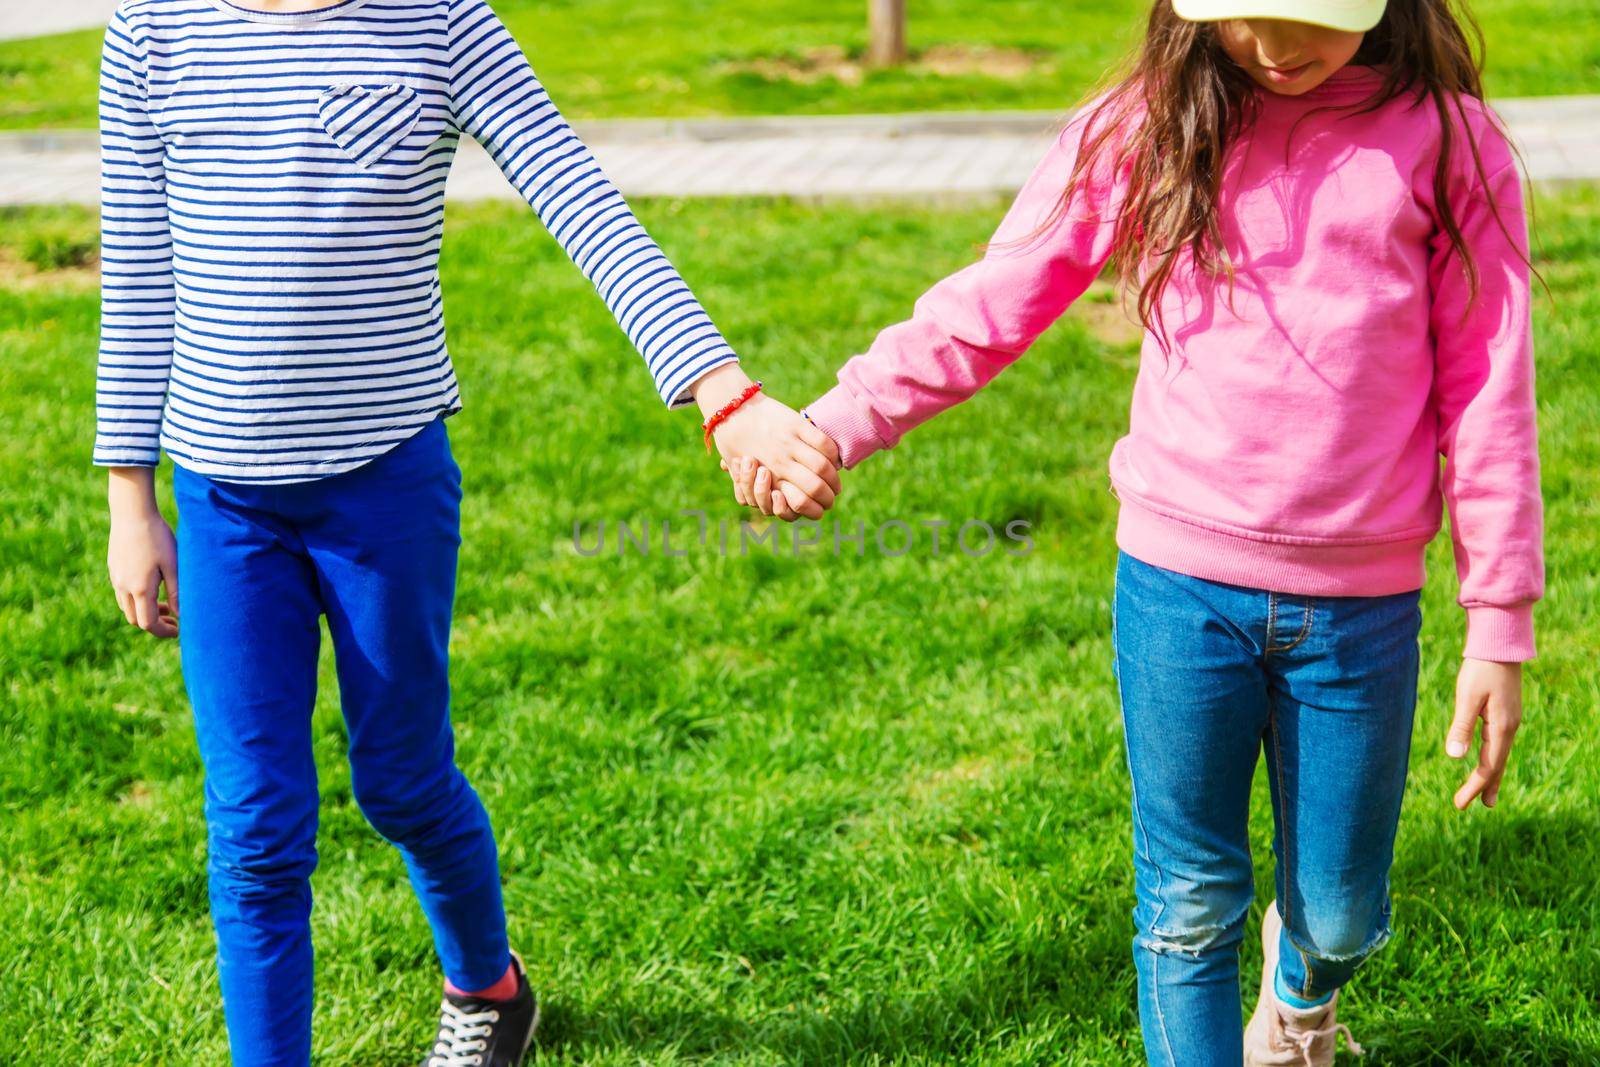 children holding hands in the park.selective focus by mila1784